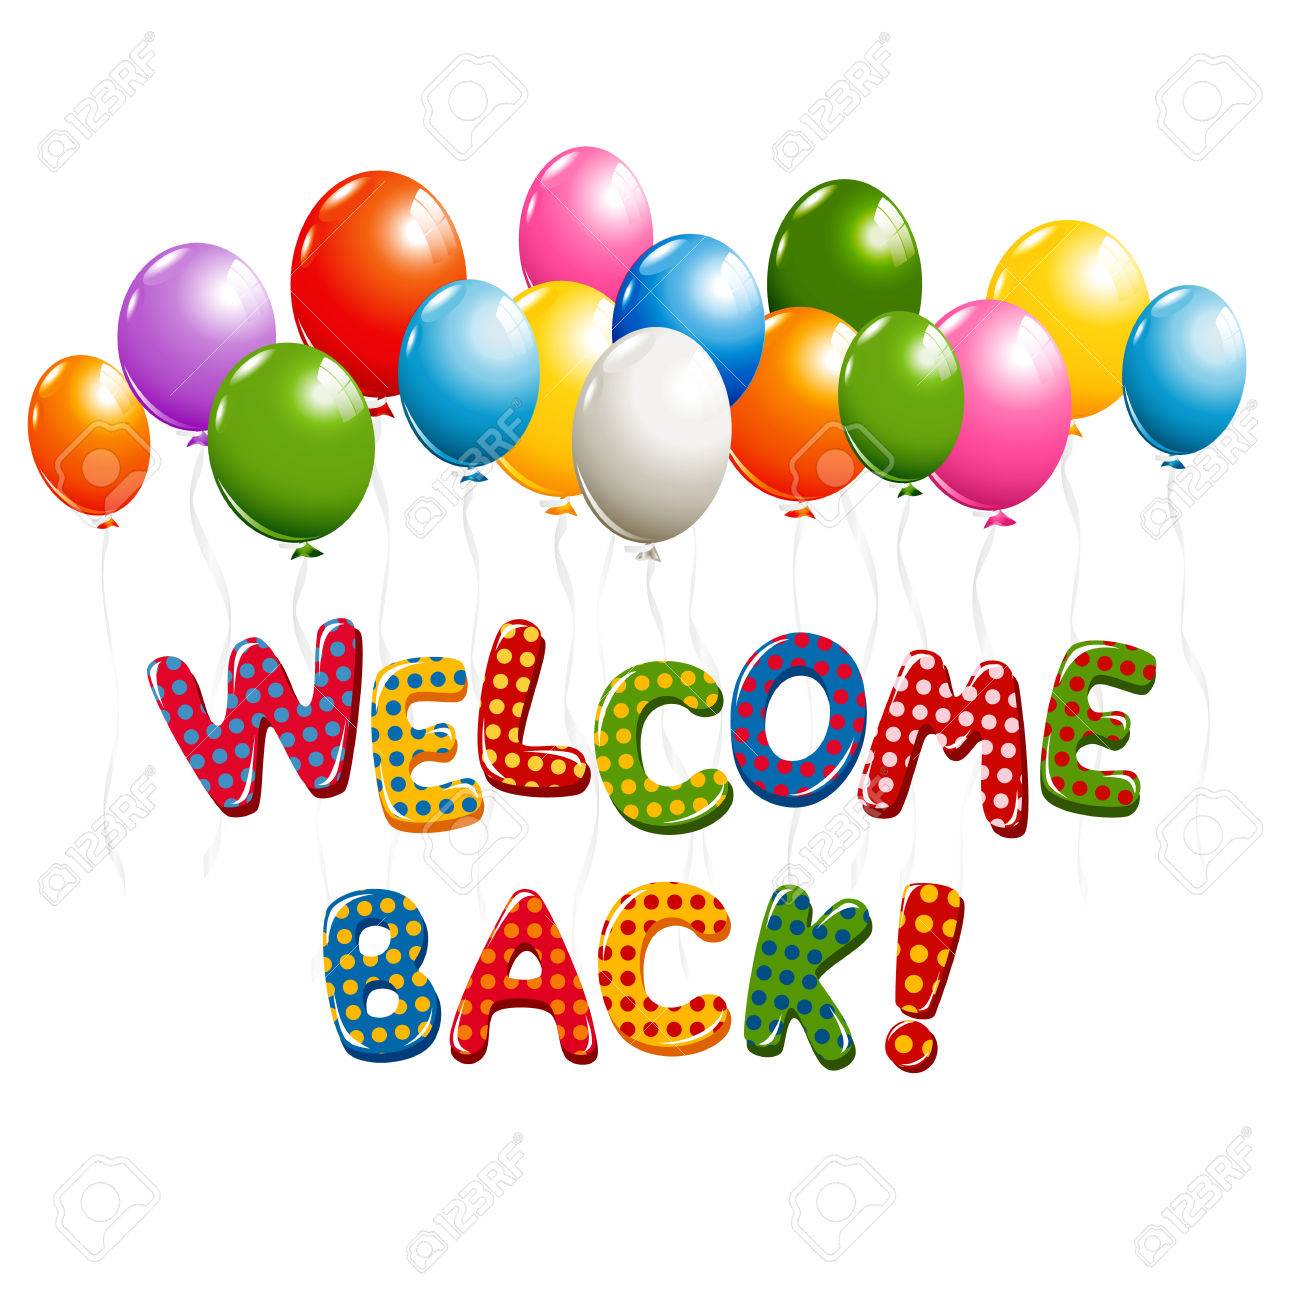 Welcome Back text in colorful polka dot design with balloons.